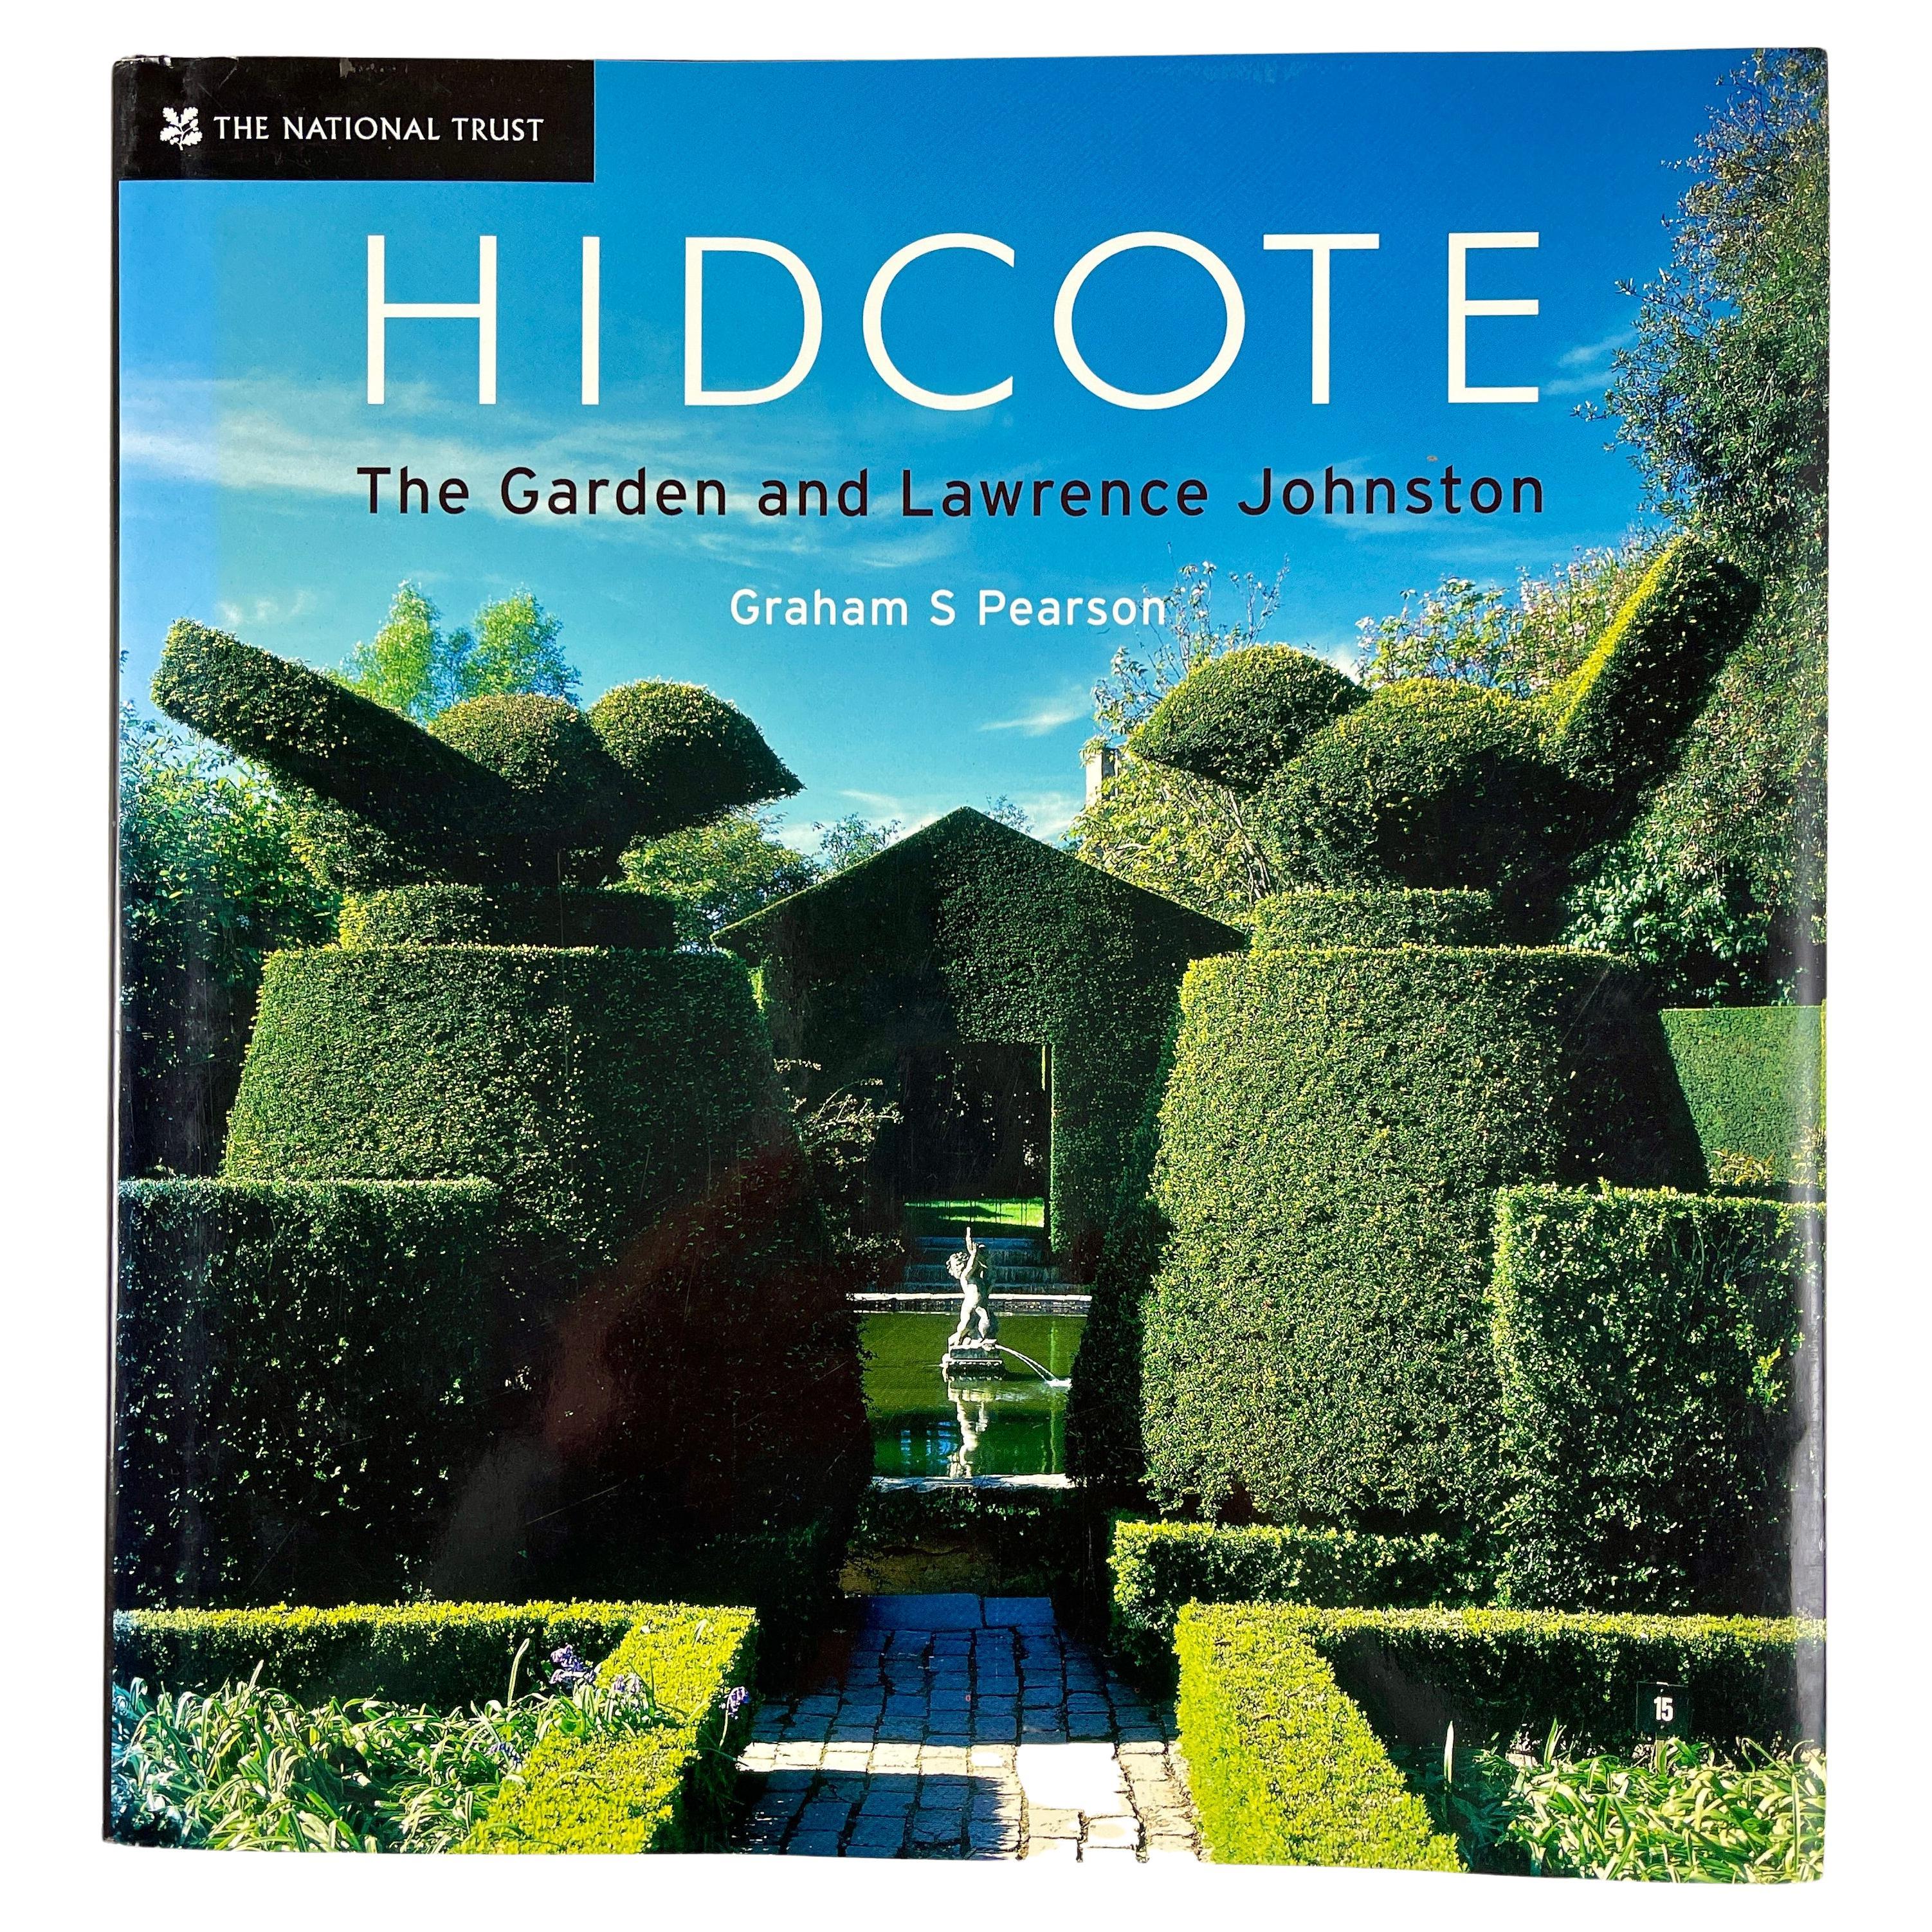 Hidcote the Garden and Lawrence Johnston, National Trust Book For Sale